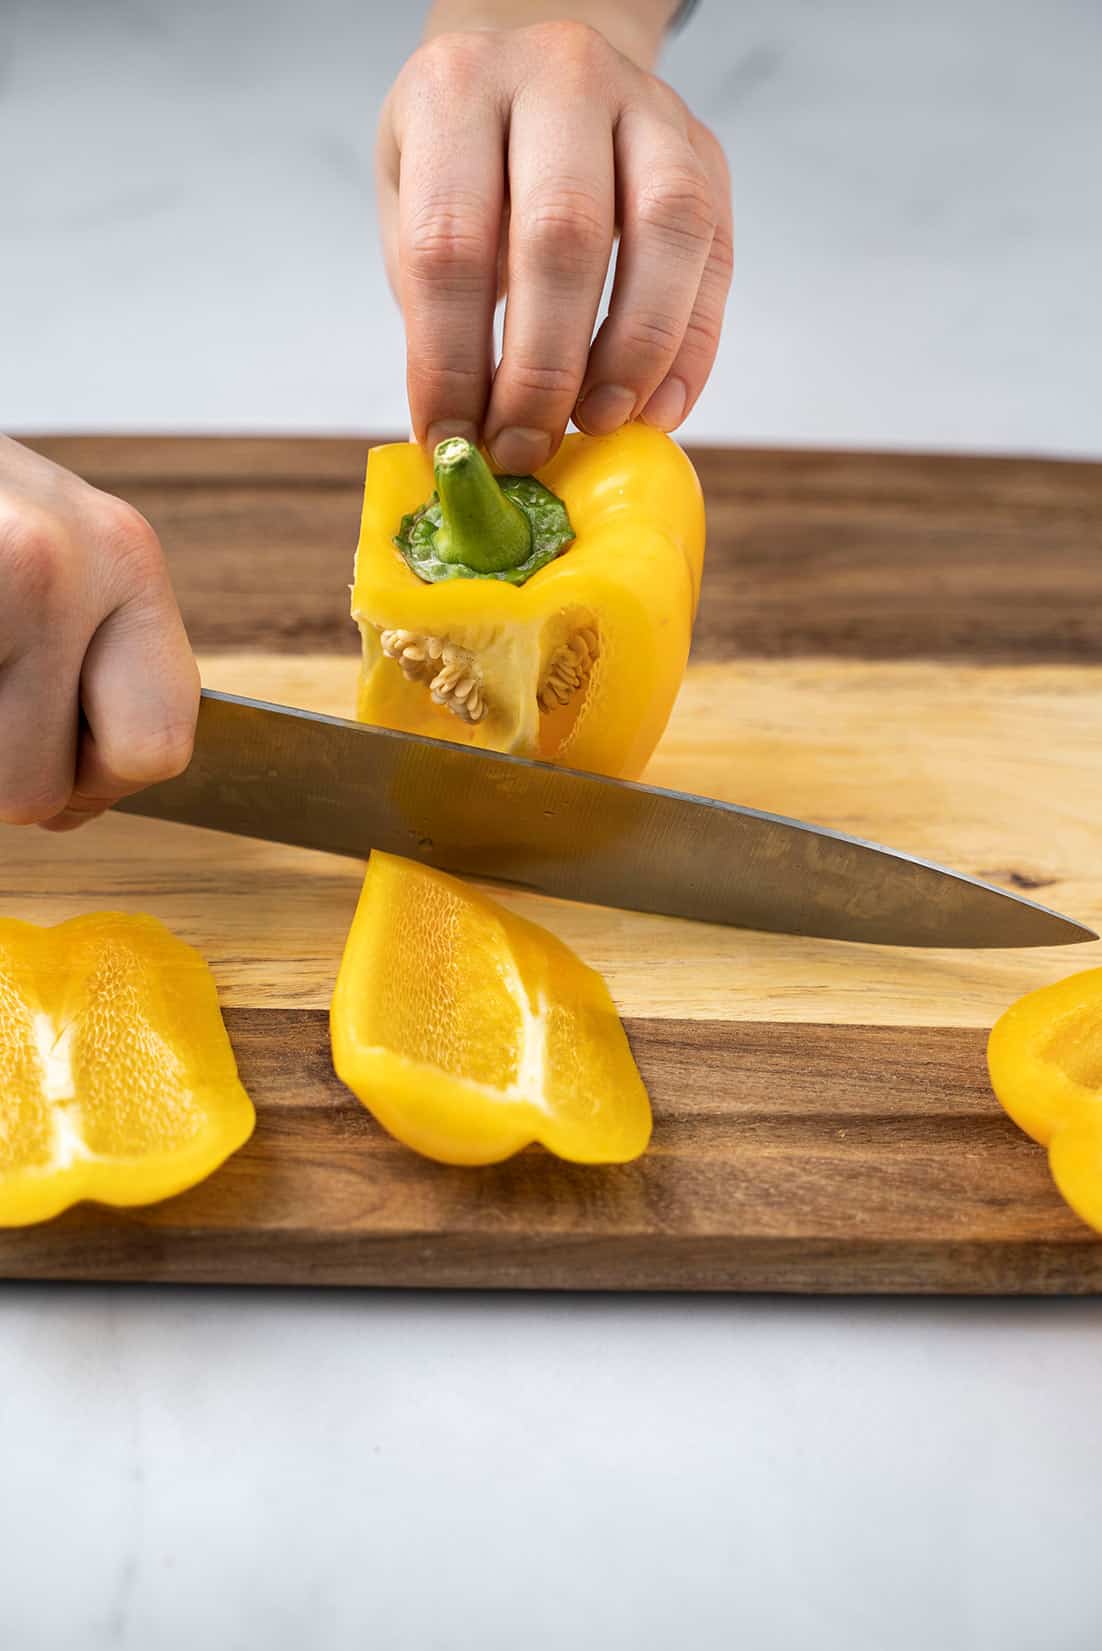 slicing the side of the pepper